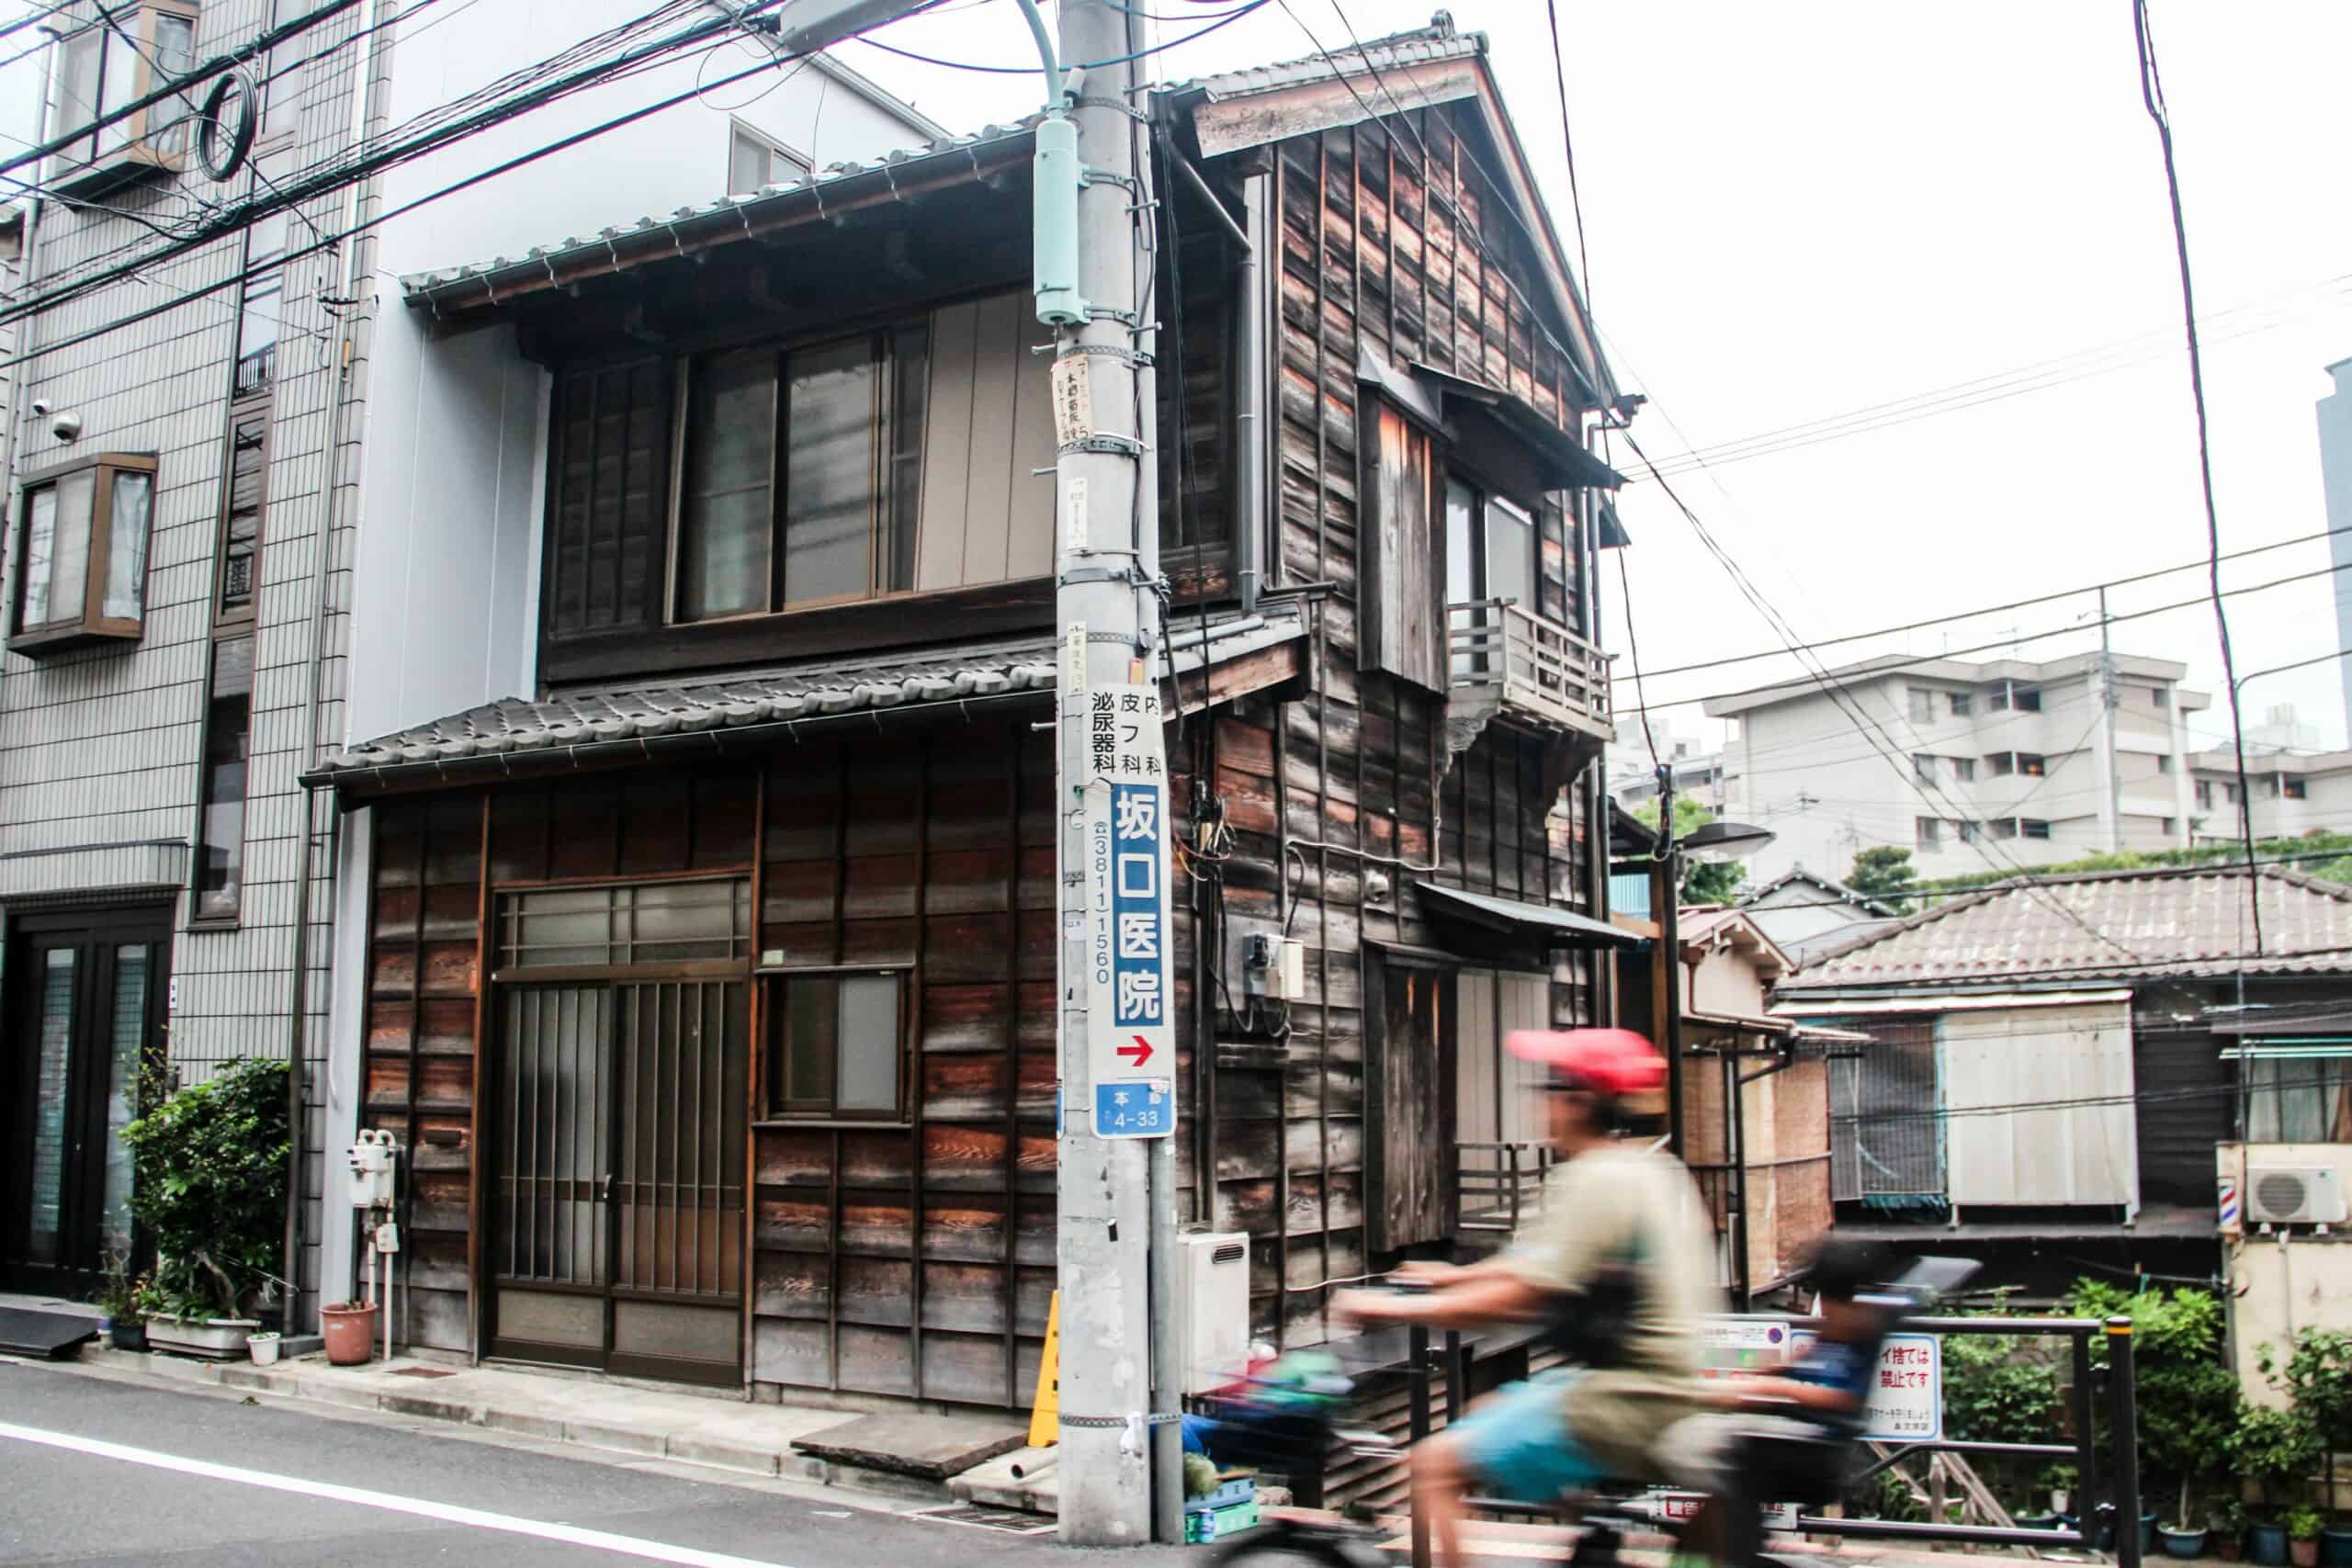 A man of a bike cycles past an old, wooden house found in Tokyo, Japan.